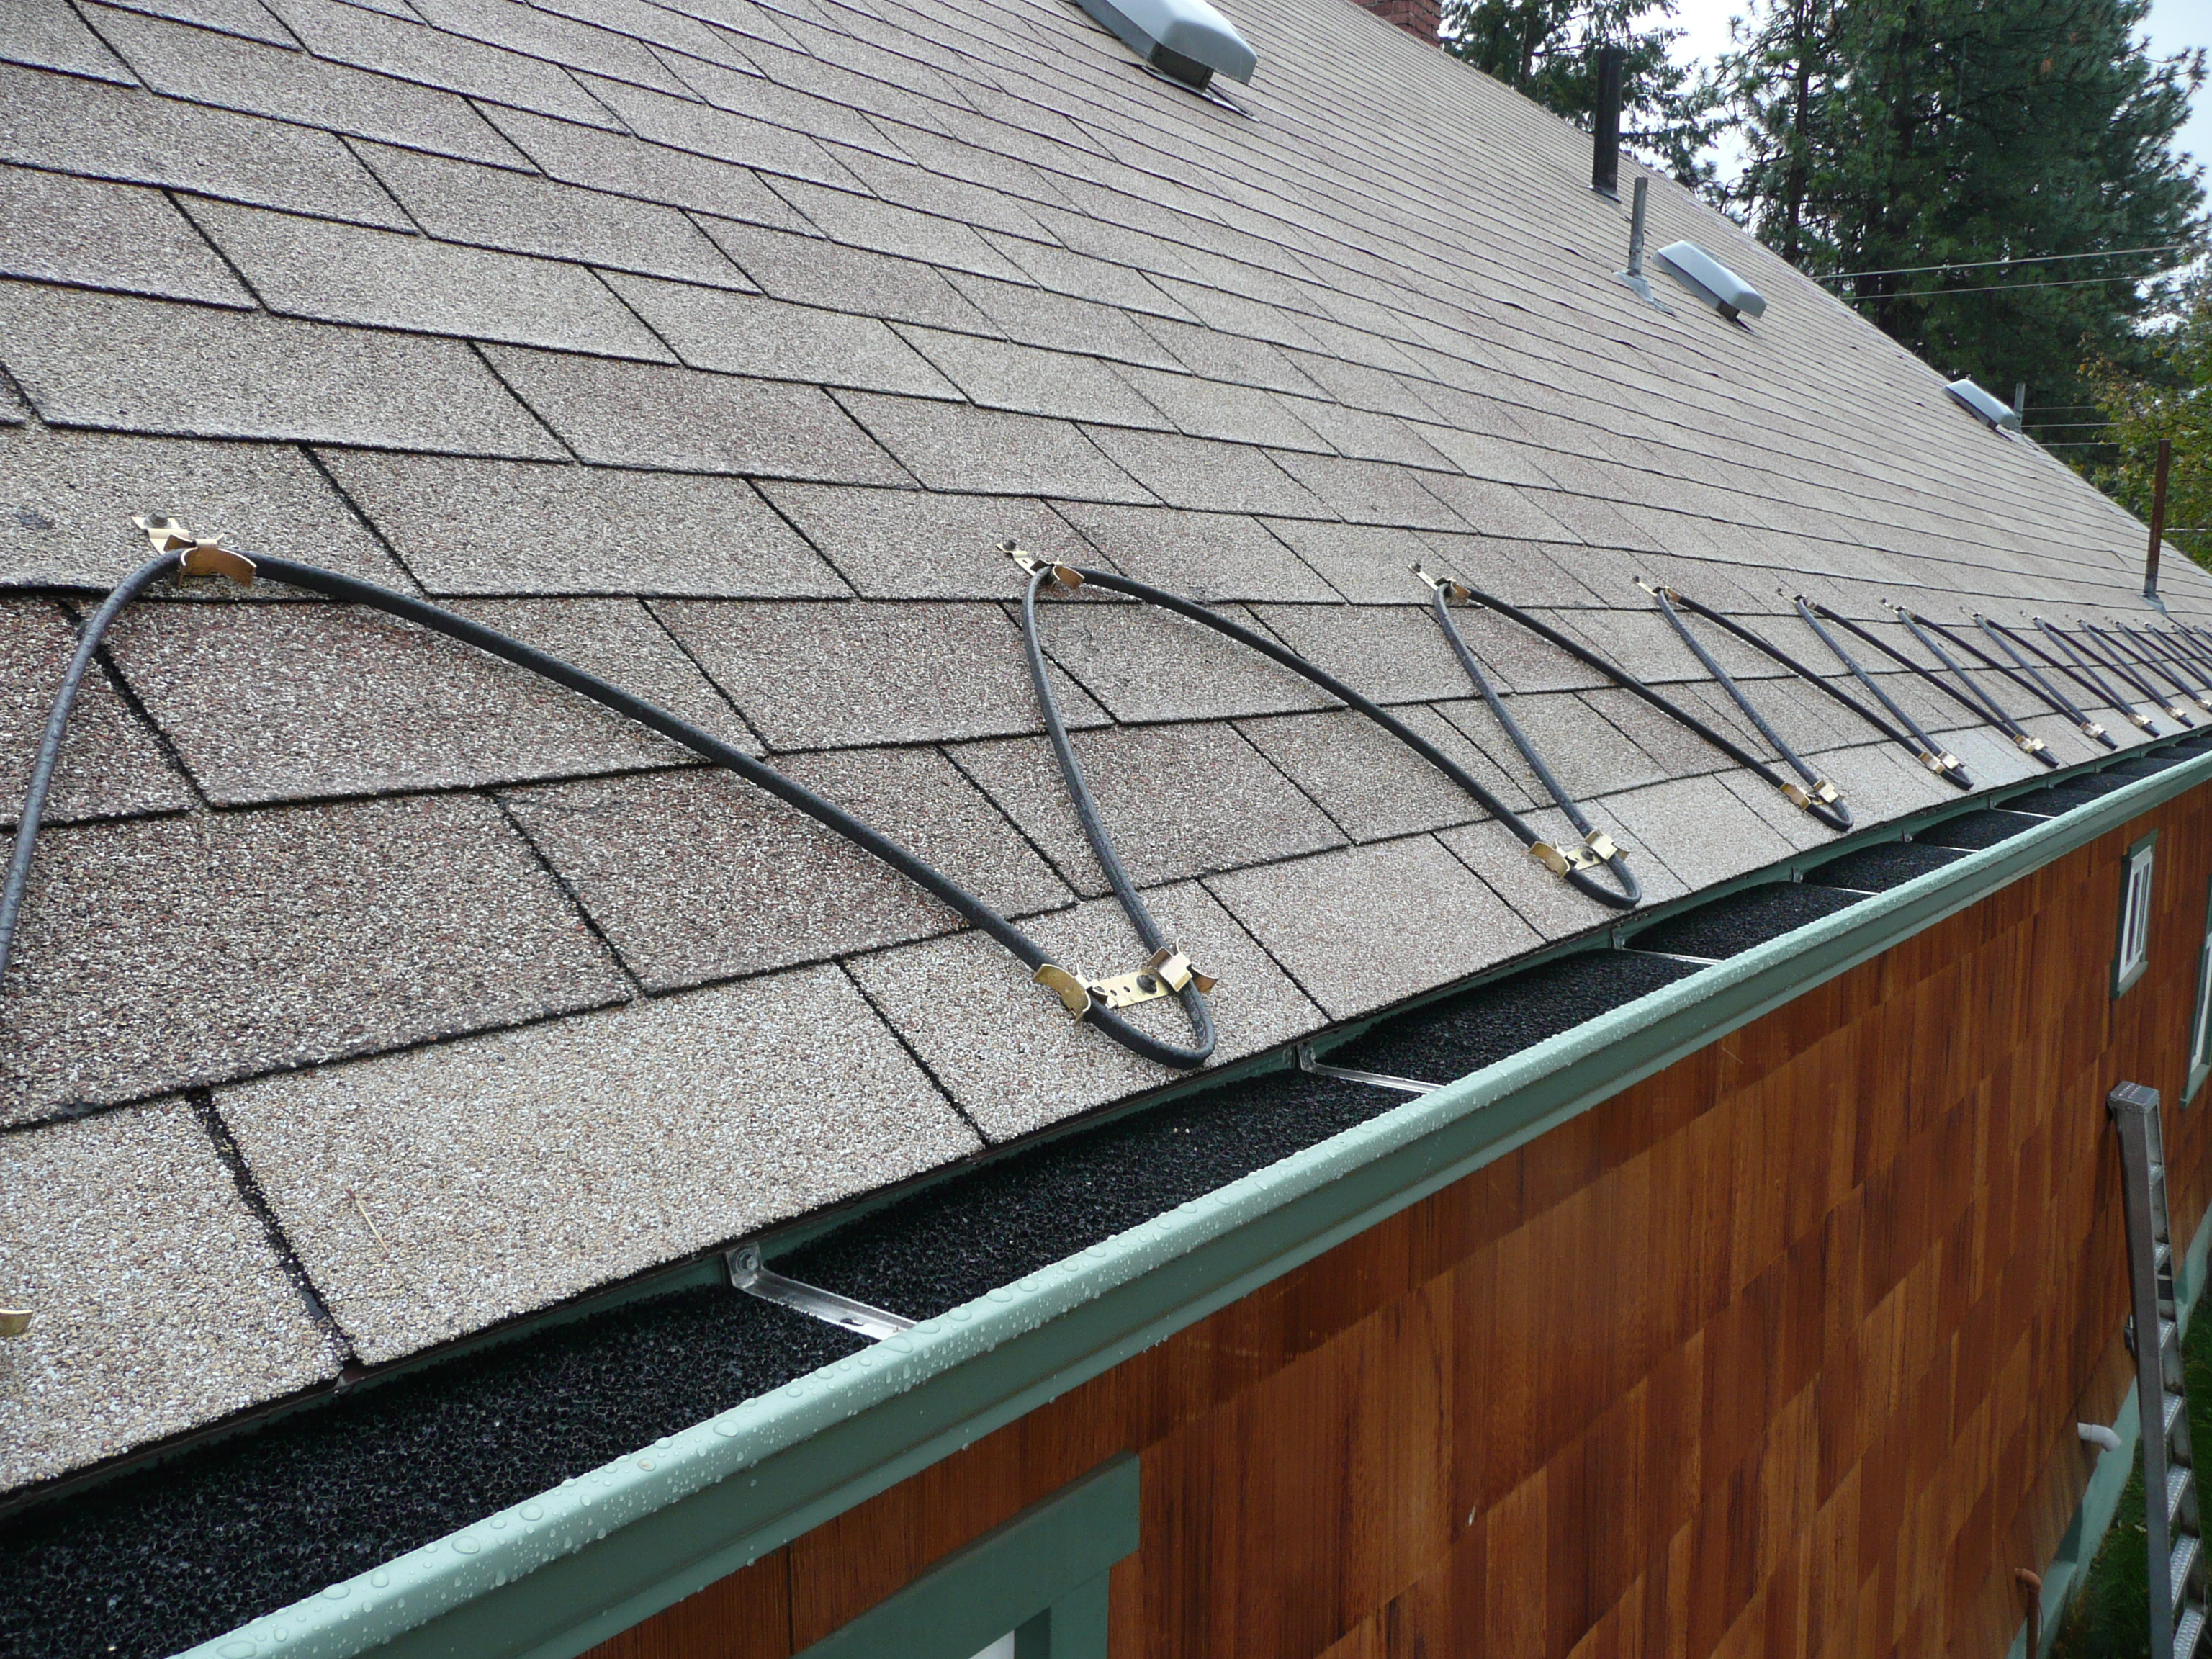 Zig Zag cables can be used on any existing or new shingle roof.